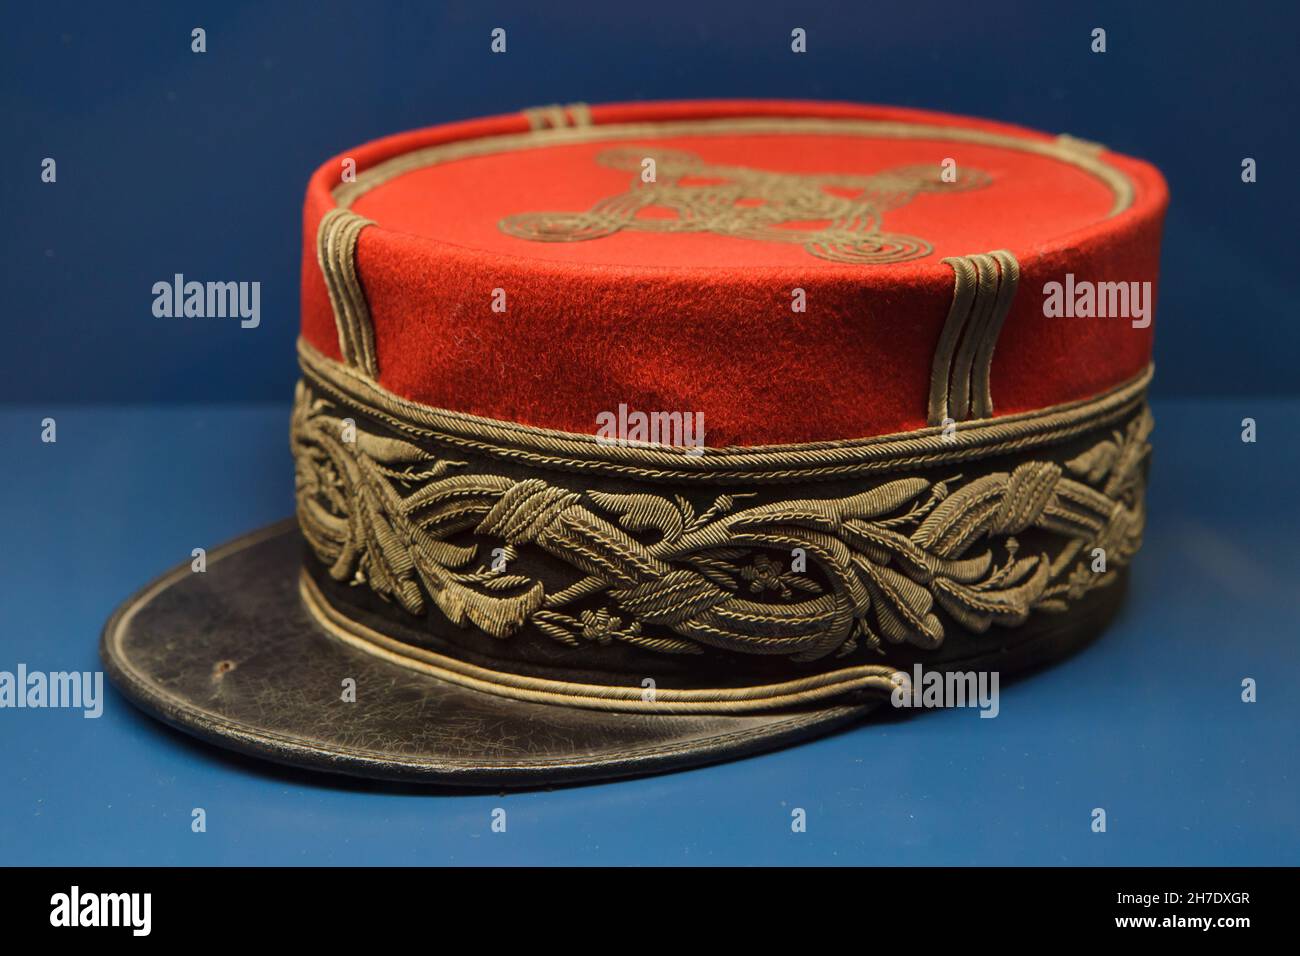 Kepi of French general Louis Auguste Adrian (1859 – 1933) on display in the Armistice Museum in the Forest of Compiègne (Forêt de Compiègne) near Compiègne in France. The Armistice Museum is located on the ground of the Glade of the Armistice where the Armistice of 11 November 1918 that ended the First World War was signed. Stock Photo